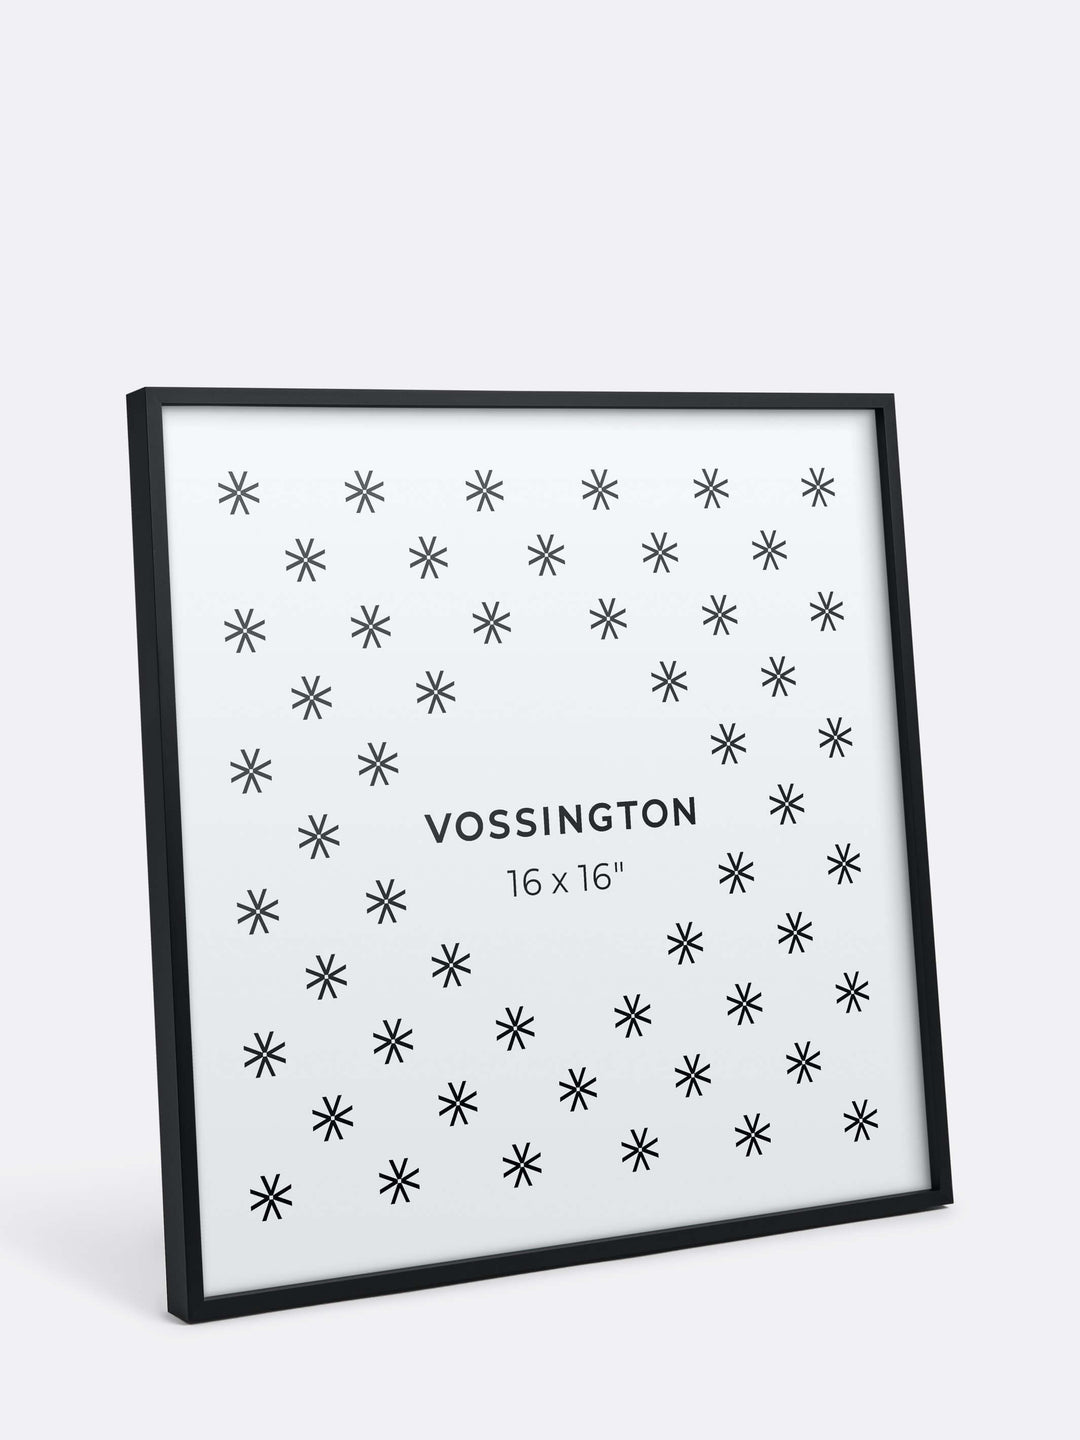 16x16 Frame - Exclusive Black Picture Frame From Vossington